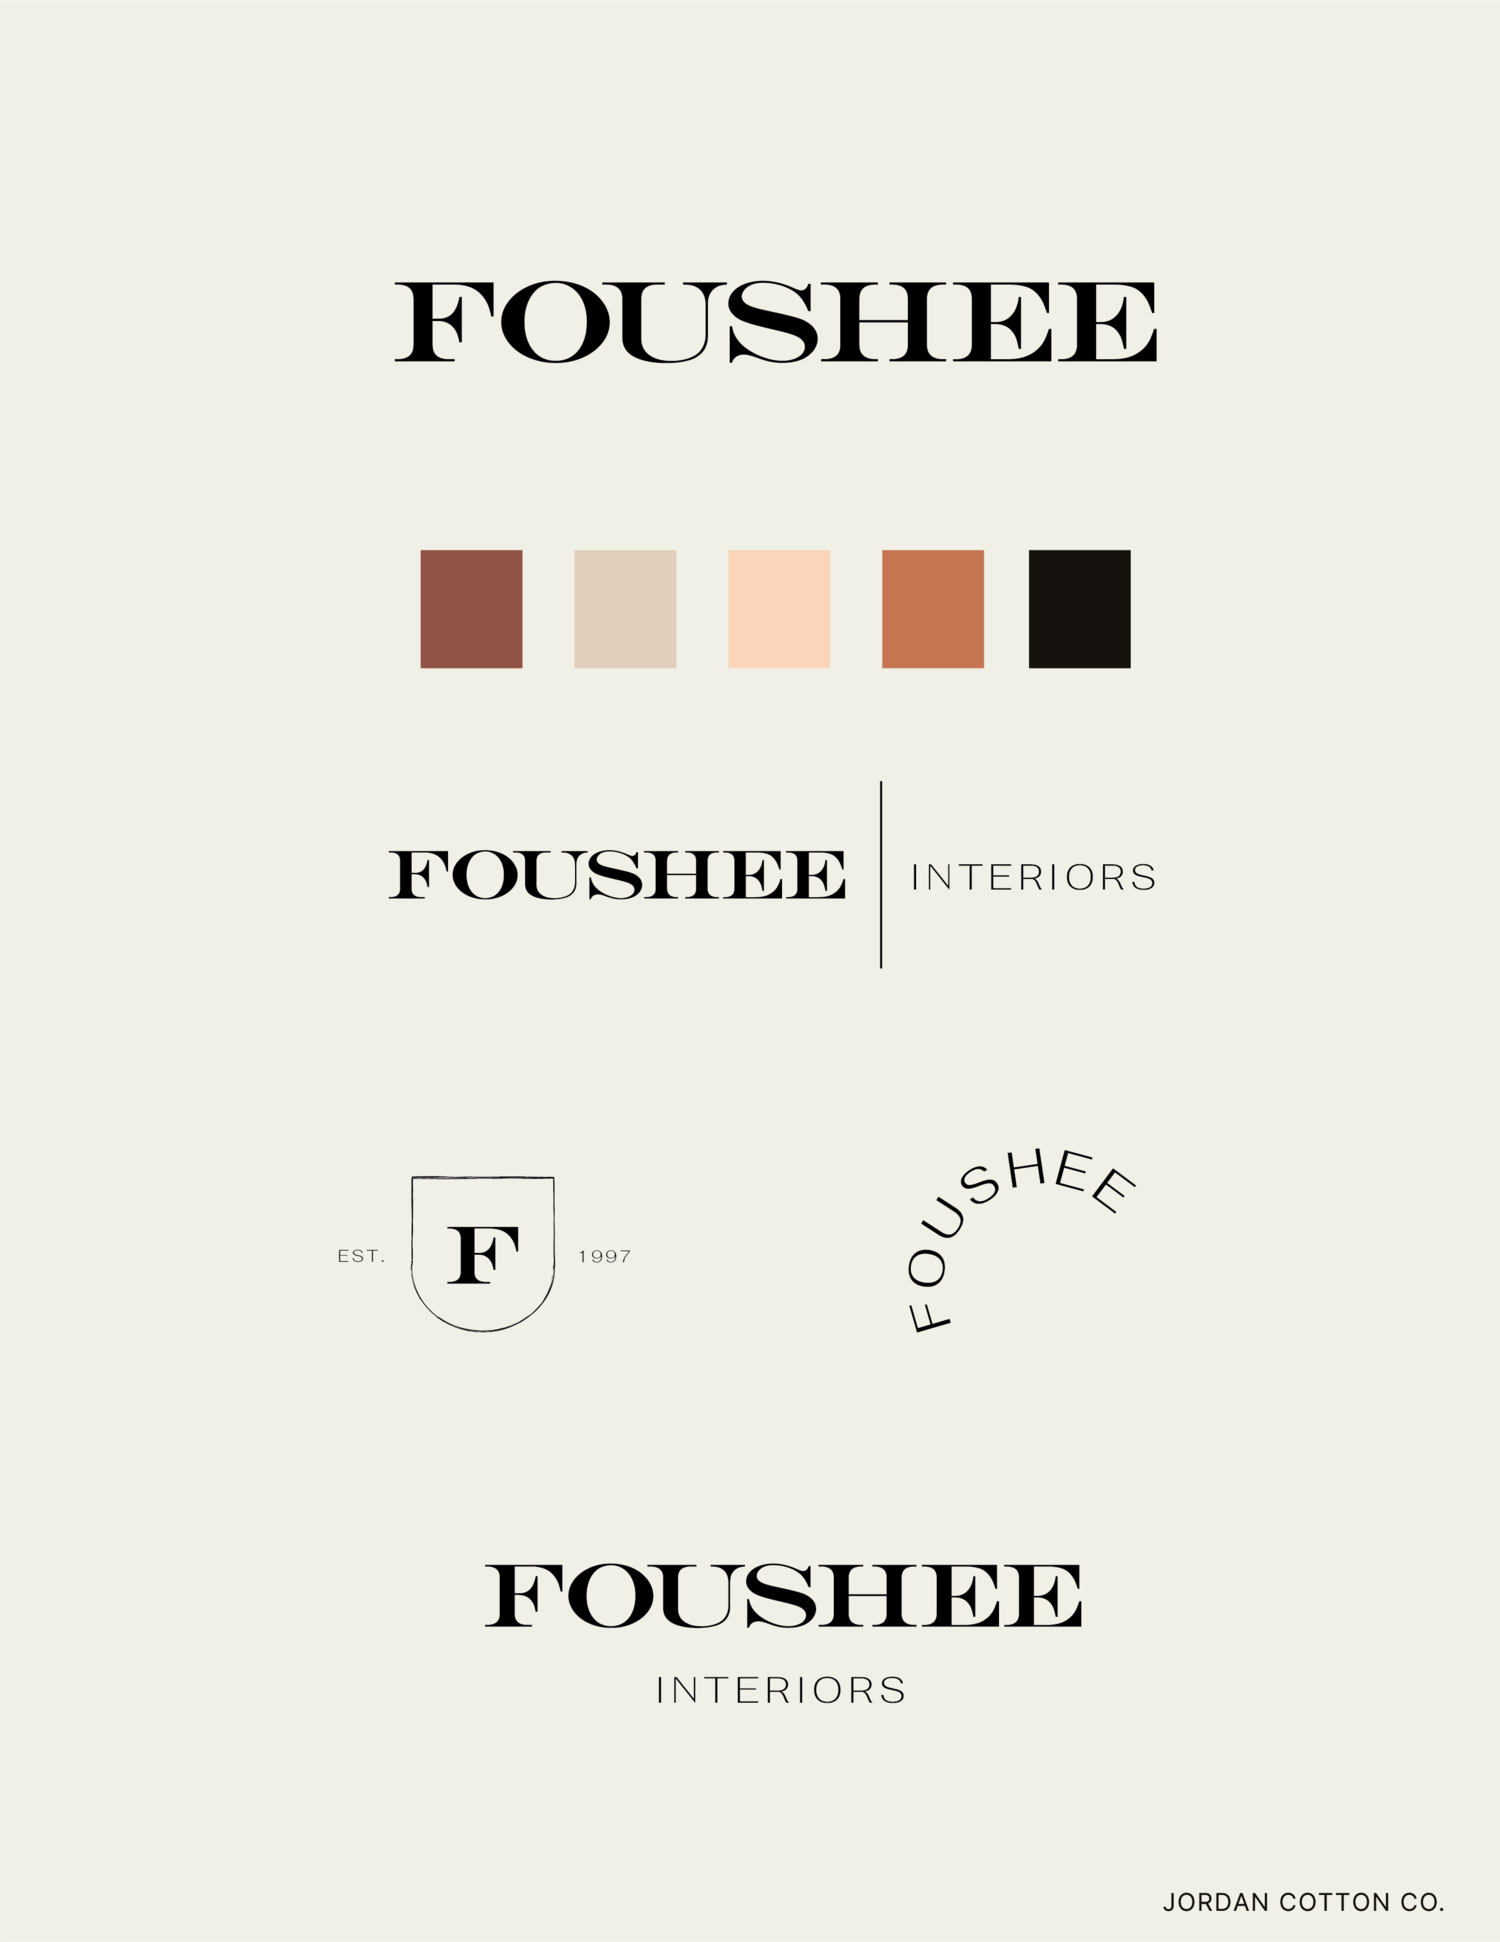 Foushee brand kit by Jordan Cotton as an example of one of 5 Brand Kit Examples to Inspire Your Brand Identity.